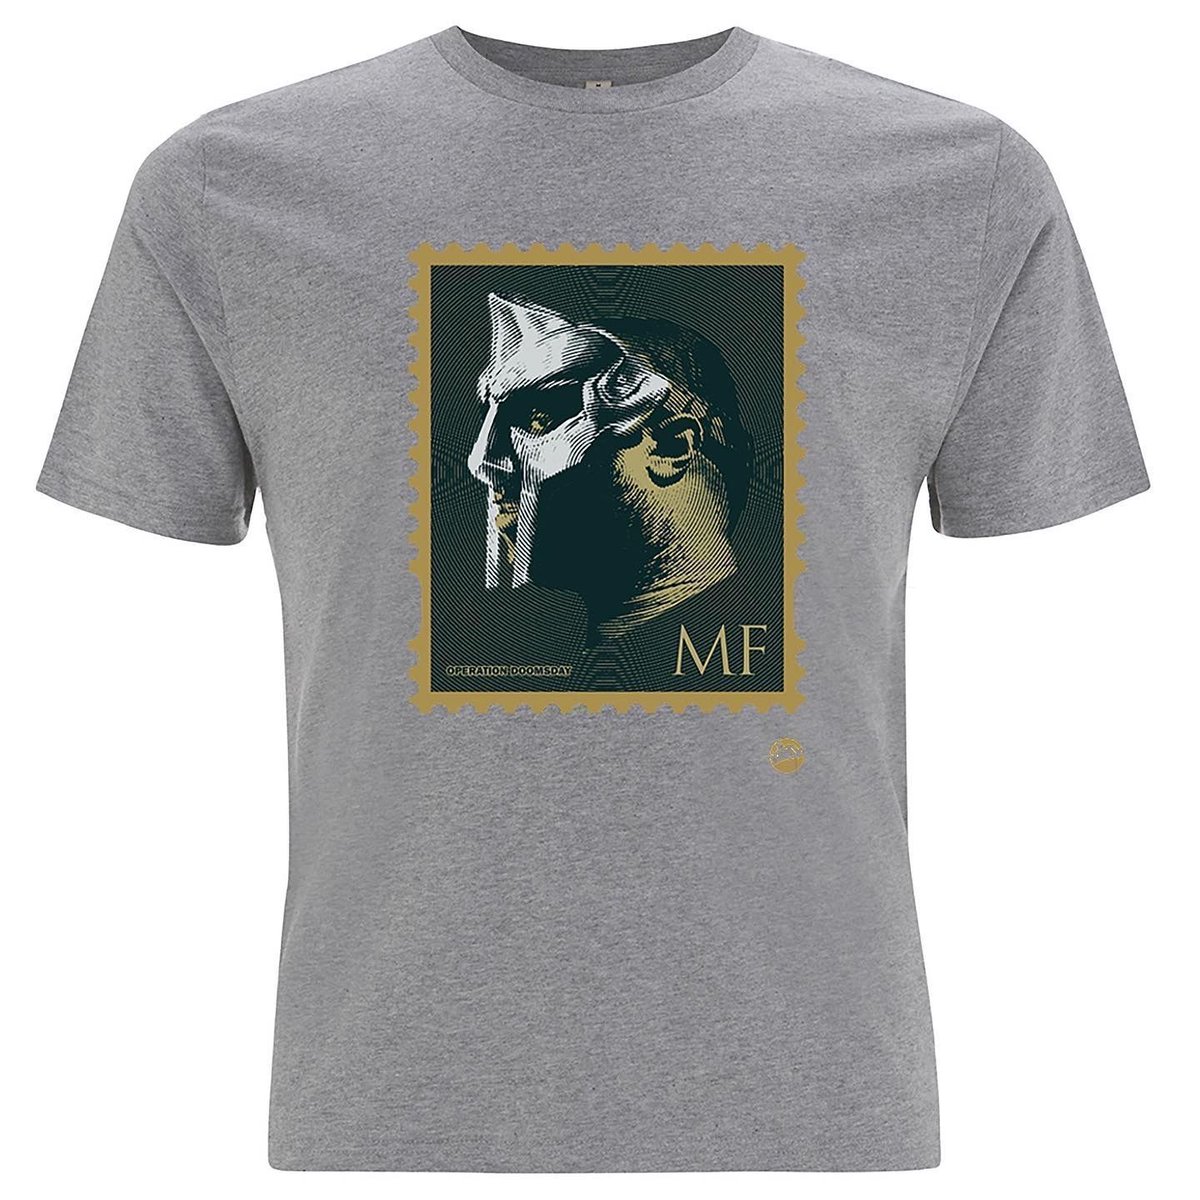 LOW STOCK! MF DOOM HipHop Stamp T-Shirt (Grey) NEW! “Most of my VILLAINS don’t appear on no stamp” Madina madina.co.uk/shop/latest/mf… The Operation Doomsday Stamp design with green, gold and silver print pays homage to British born rapper